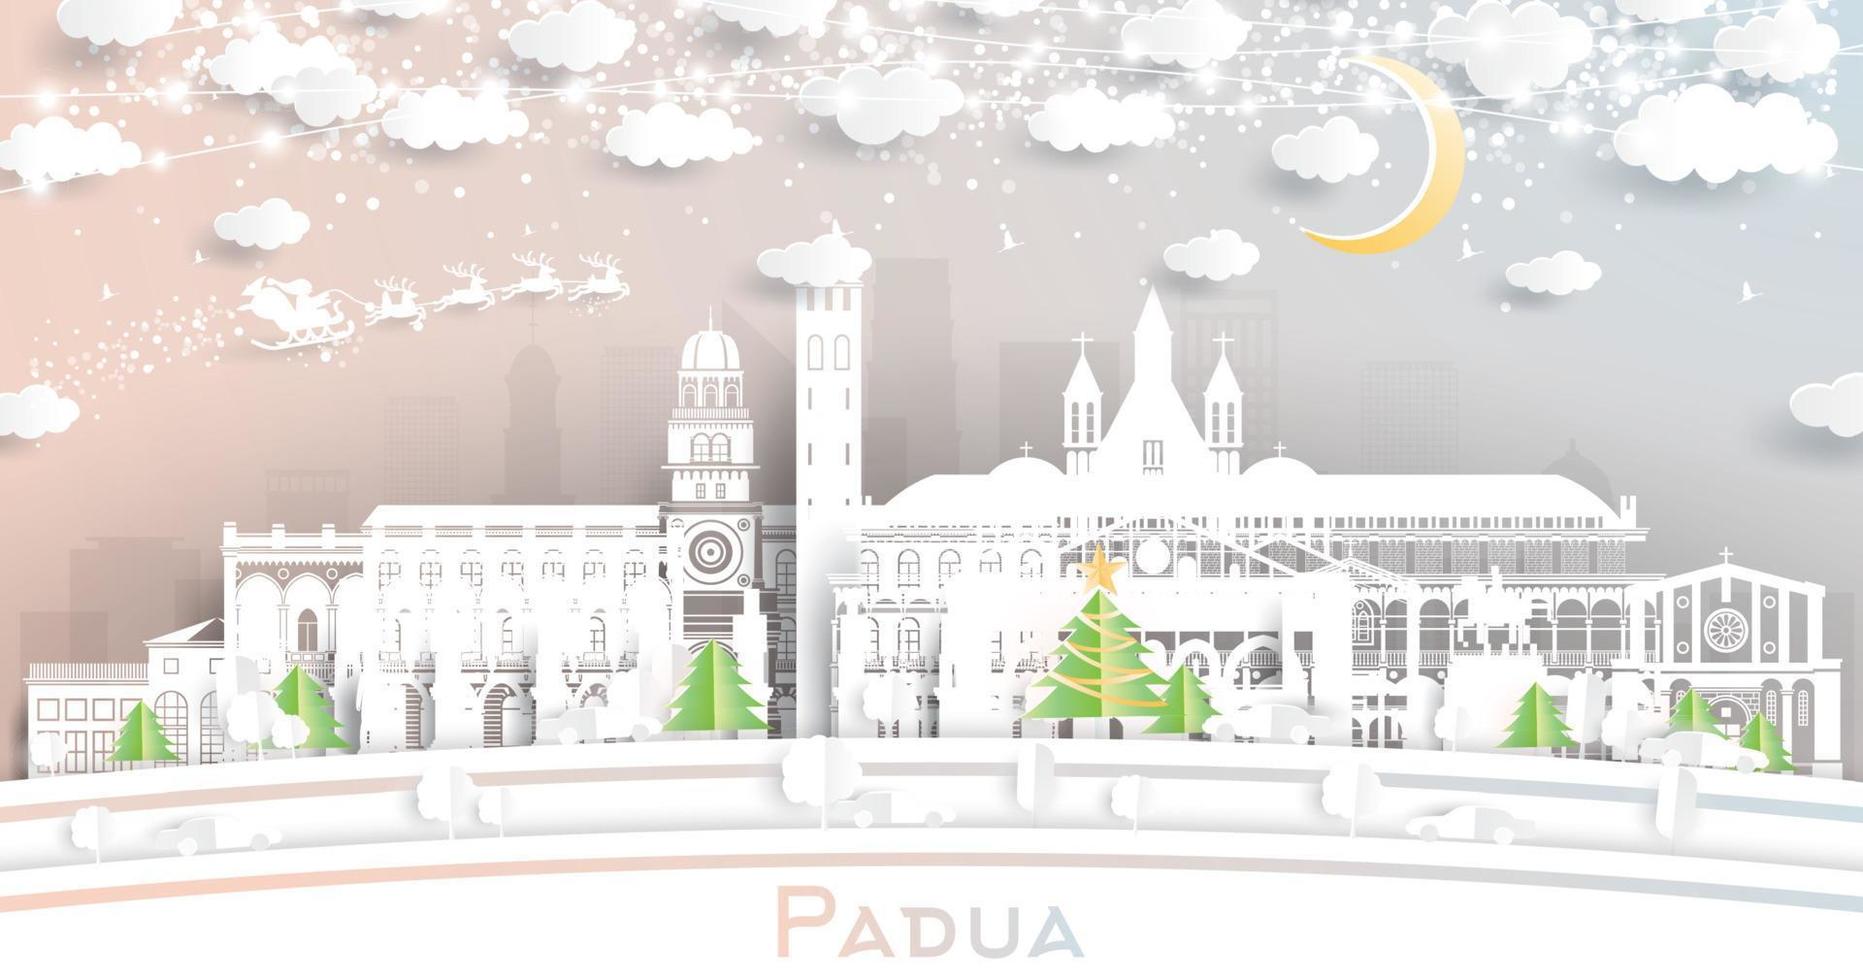 Padua Italy City Skyline in Paper Cut Style with Snowflakes, Moon and Neon Garland. vector